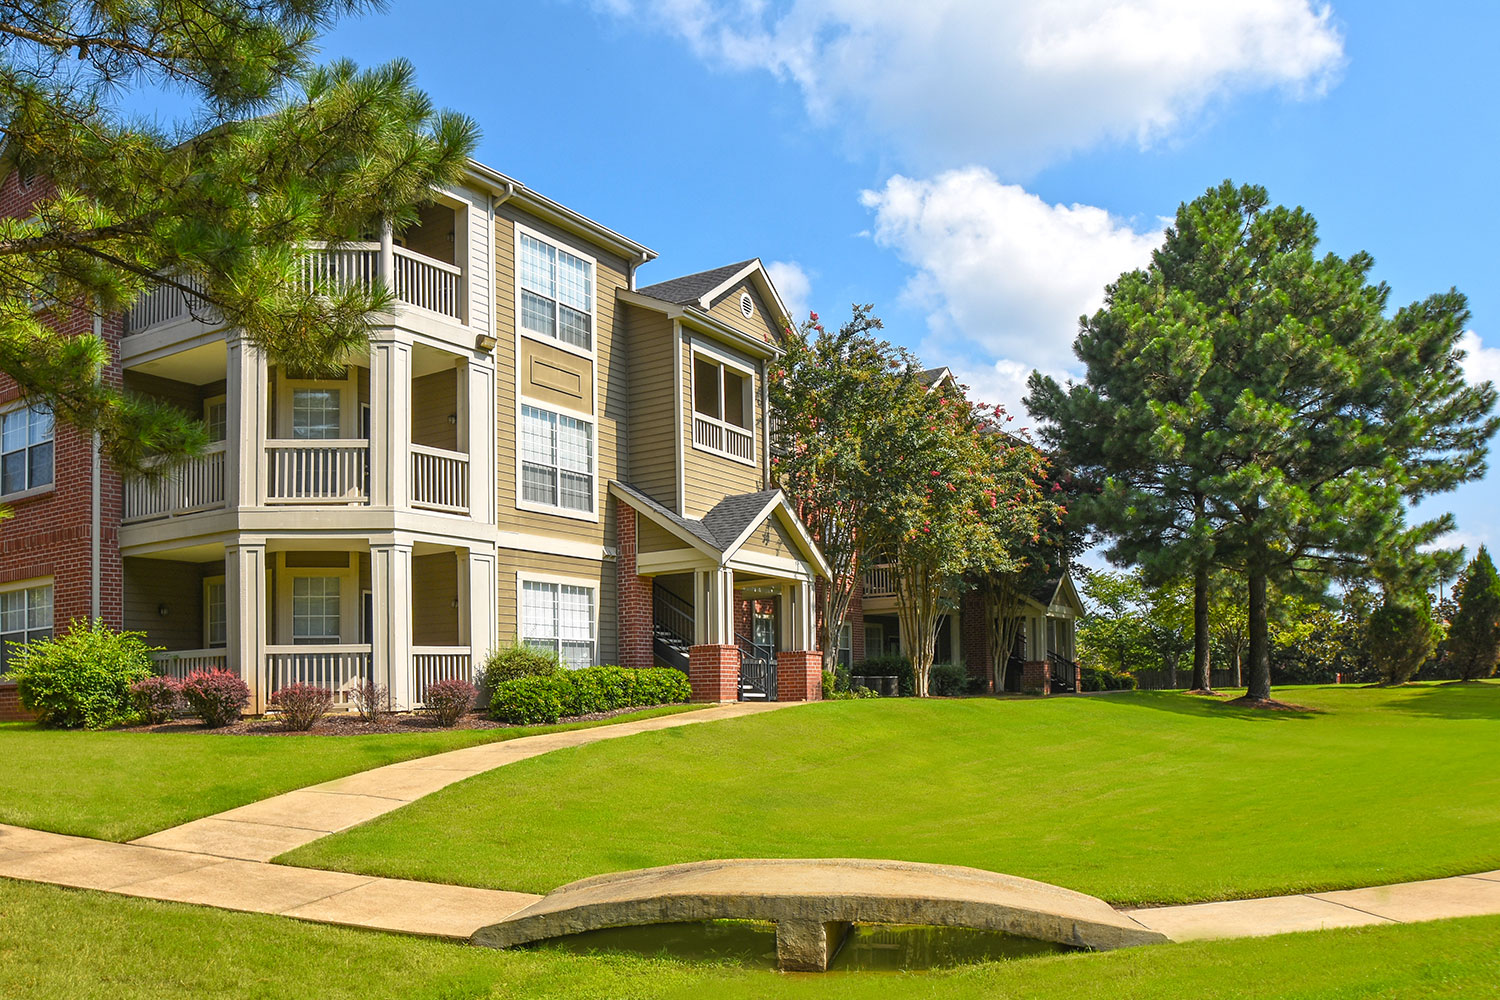 Balfour Beatty Communities enters Memphis market with multifamily acquisition